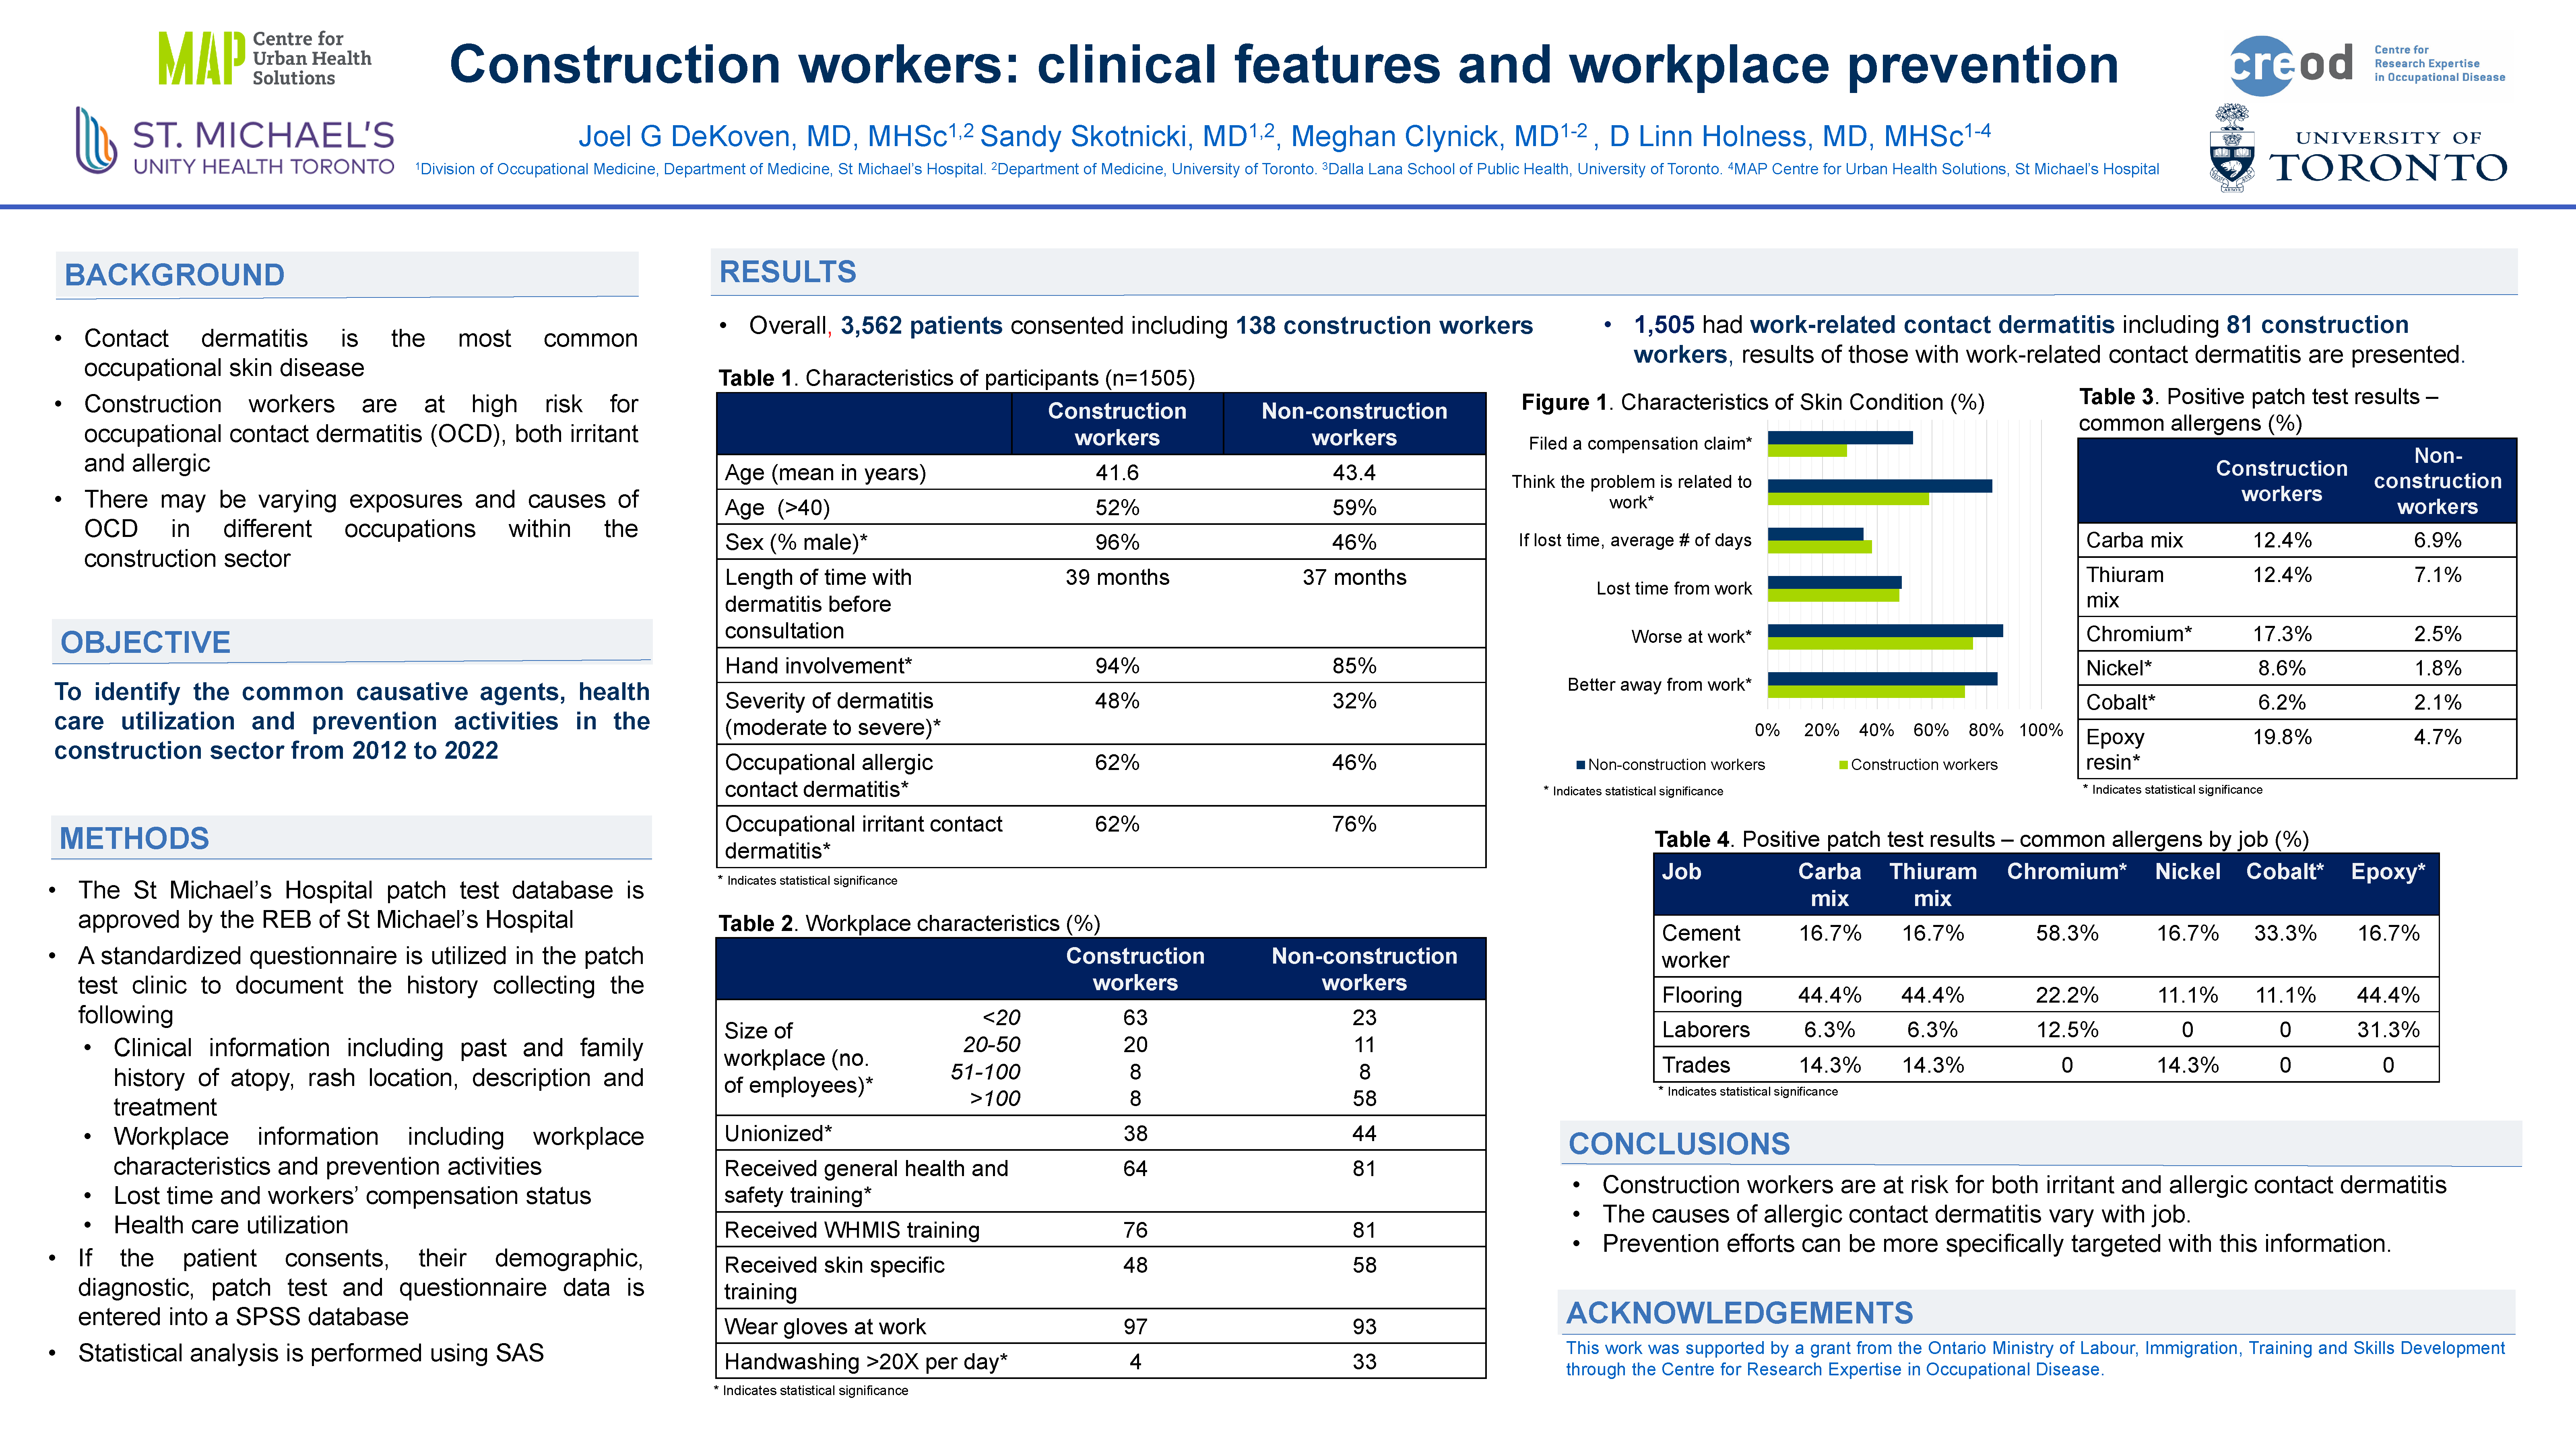 Construction workers: clinical features and workplace prevention - click/tap poster to view in pdf format